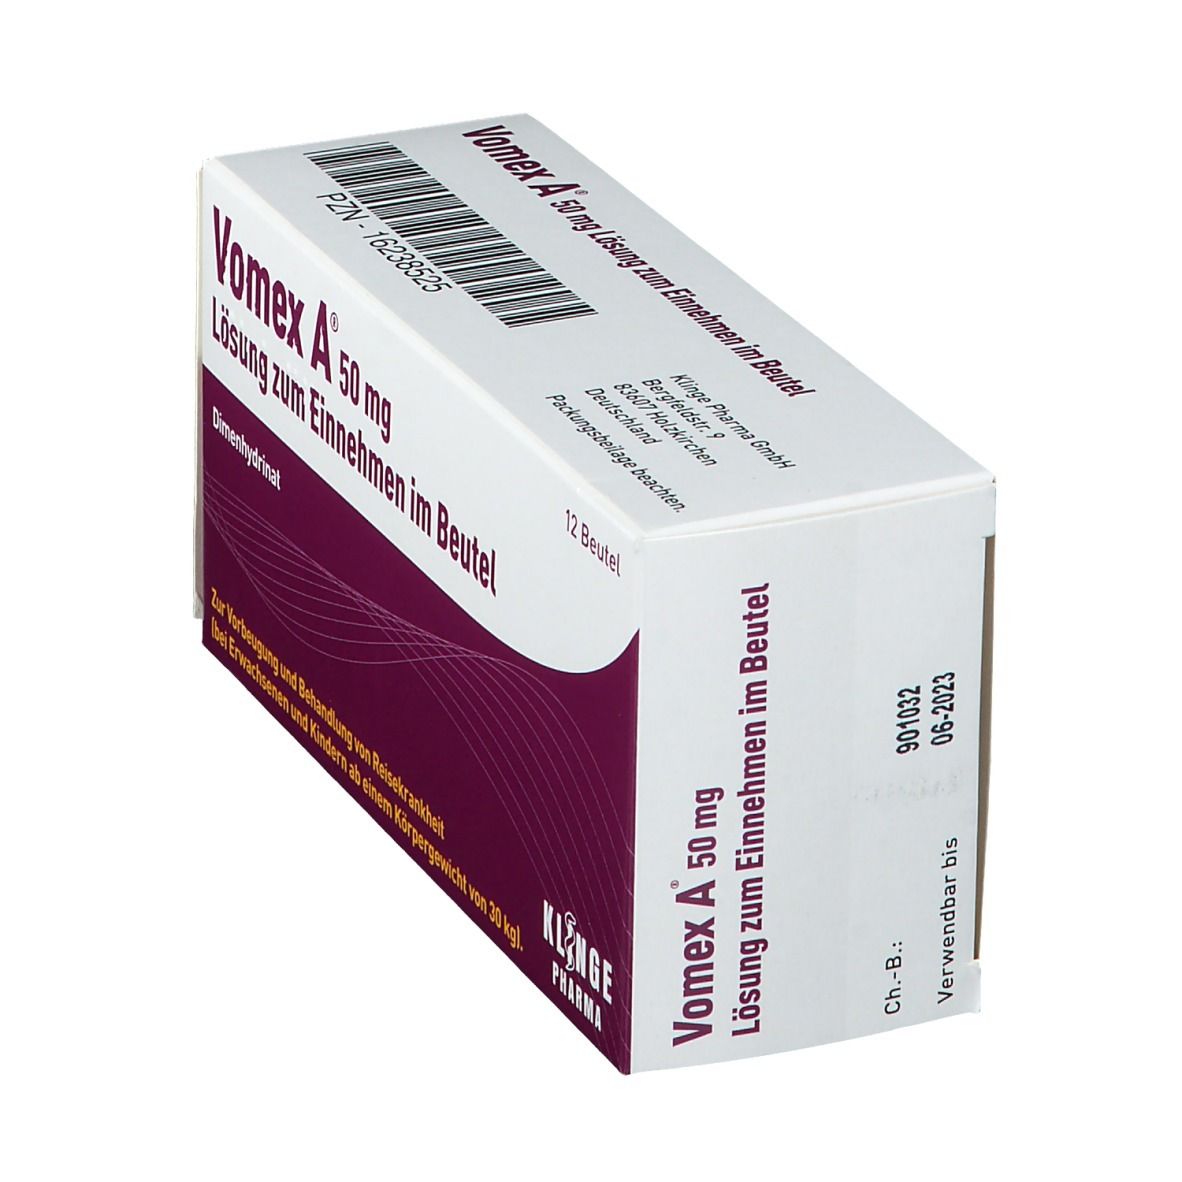 Vomex A® 50 mg